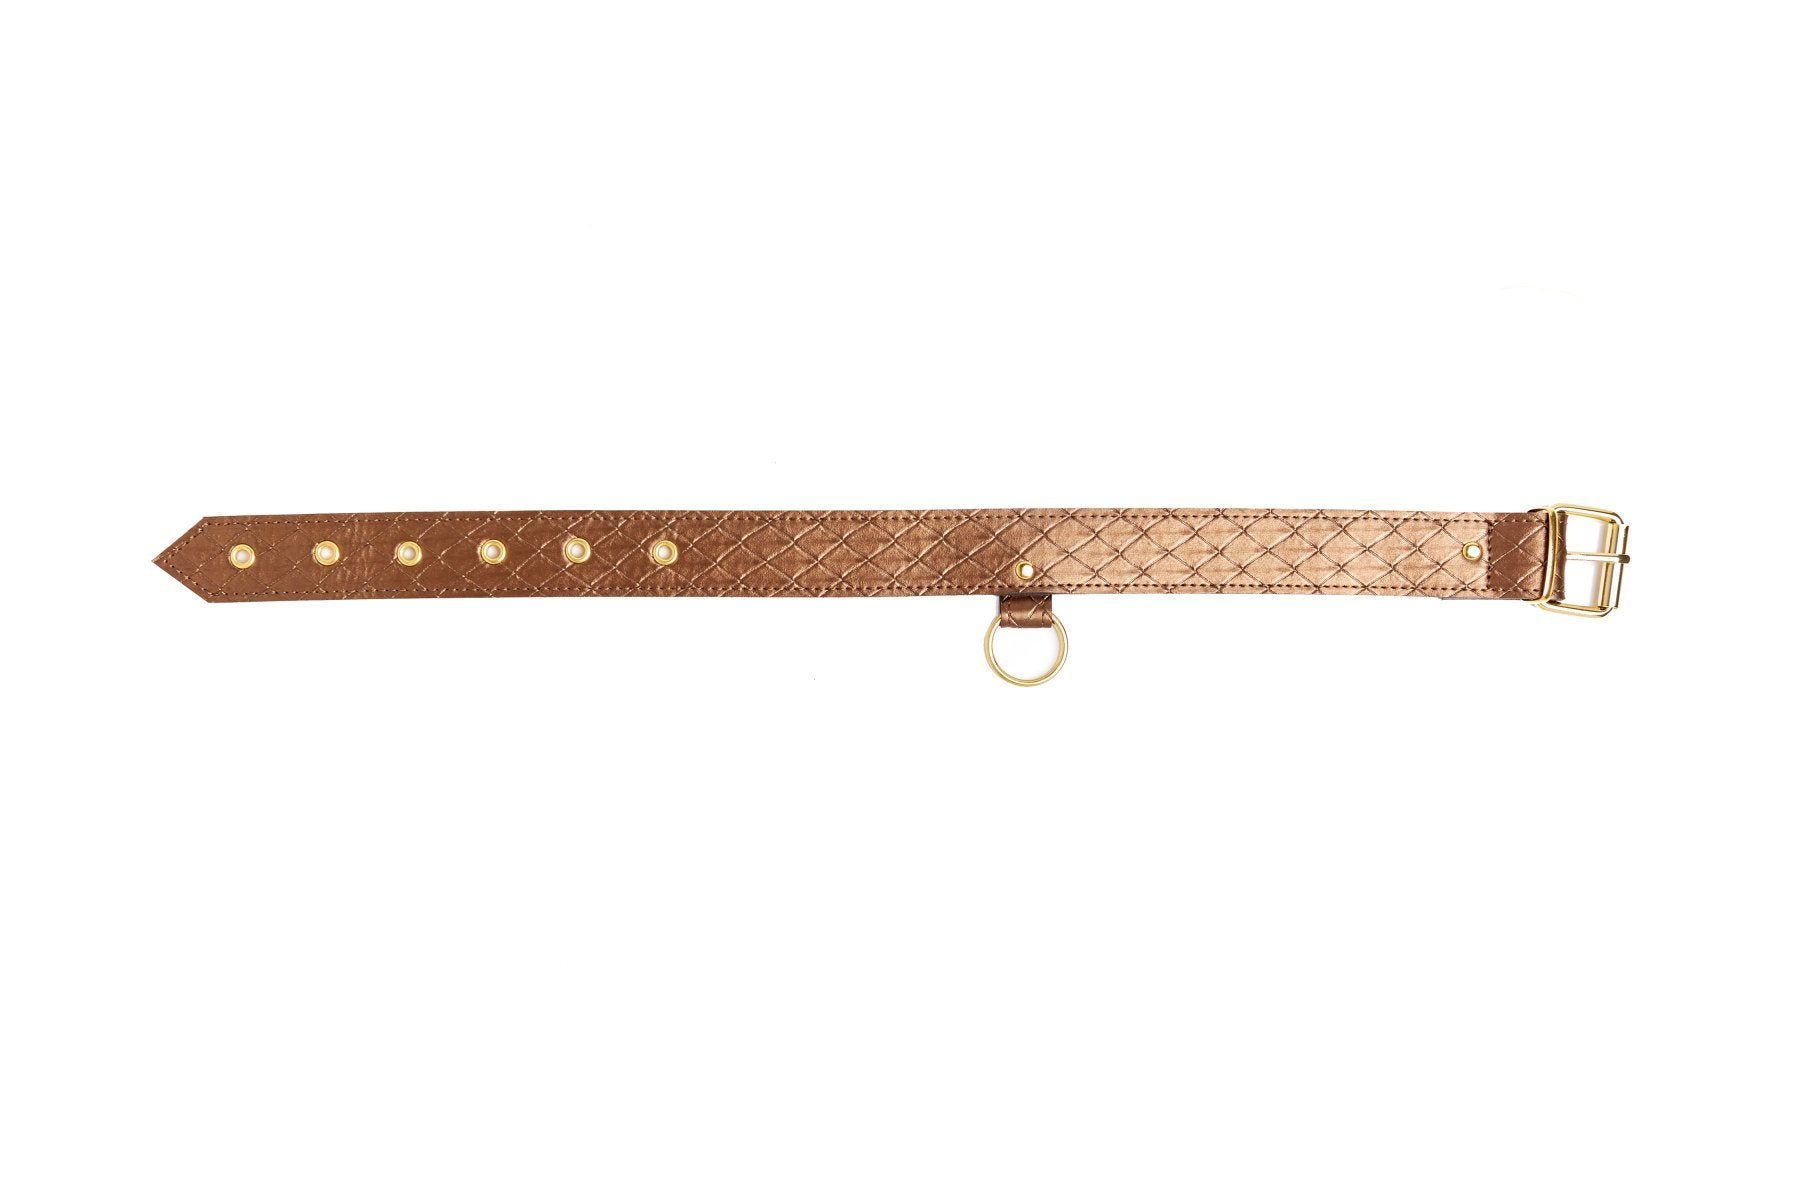 Quilted Embossed Collar and Leash Set, X-Play